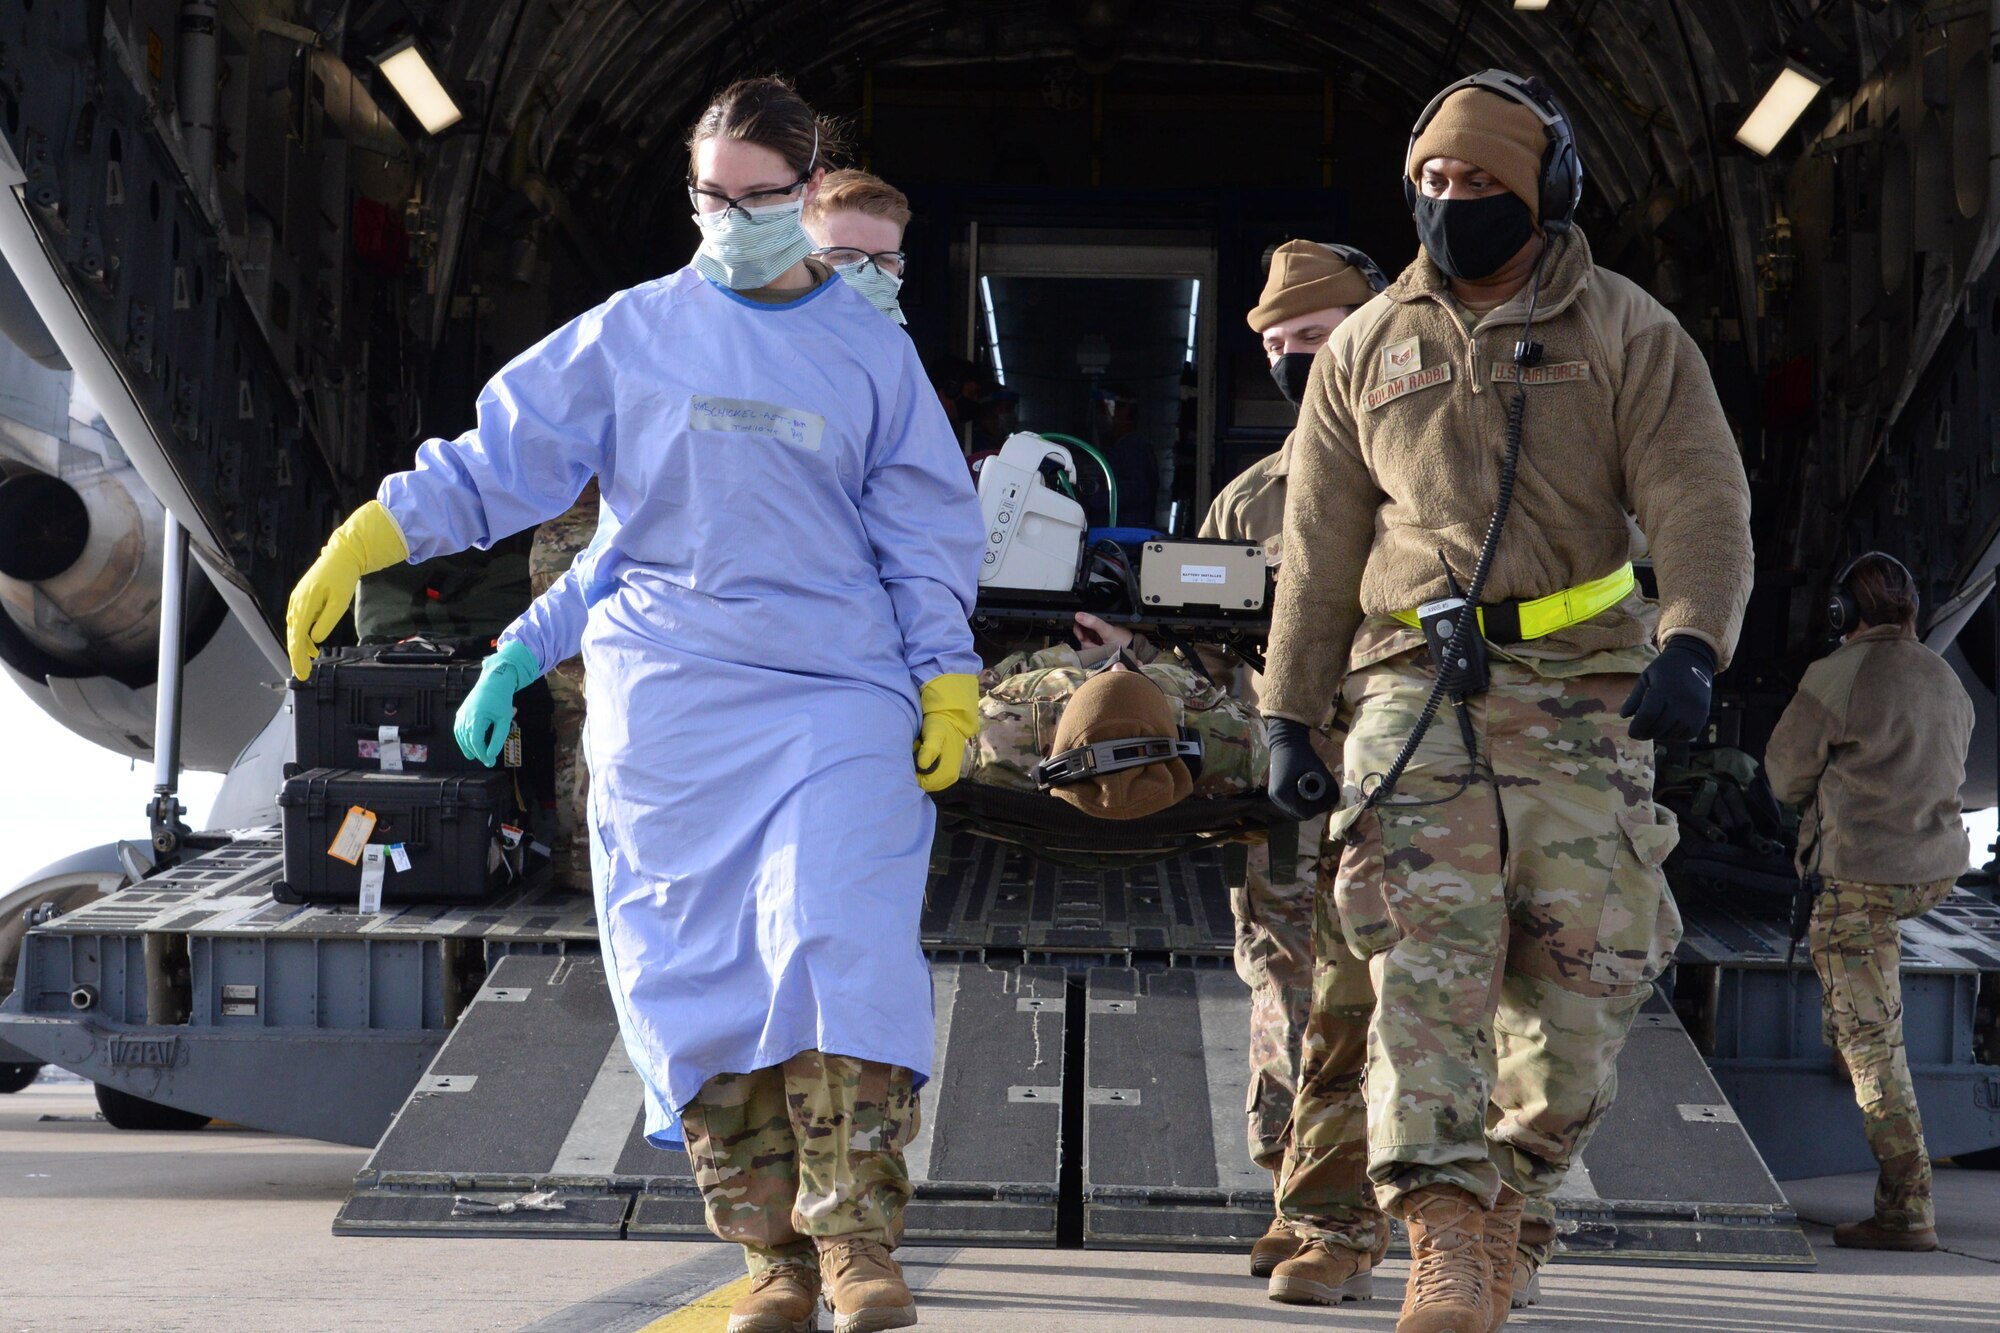 U.S. Air Force Airmen assigned to the 10th Expeditionary Aeromedical Evacuation Flight unload a litter with a simulated patient from a C-17 Globemaster III aircraft during a training at Ramstein Air Base, Germany, Jan. 26, 2021.